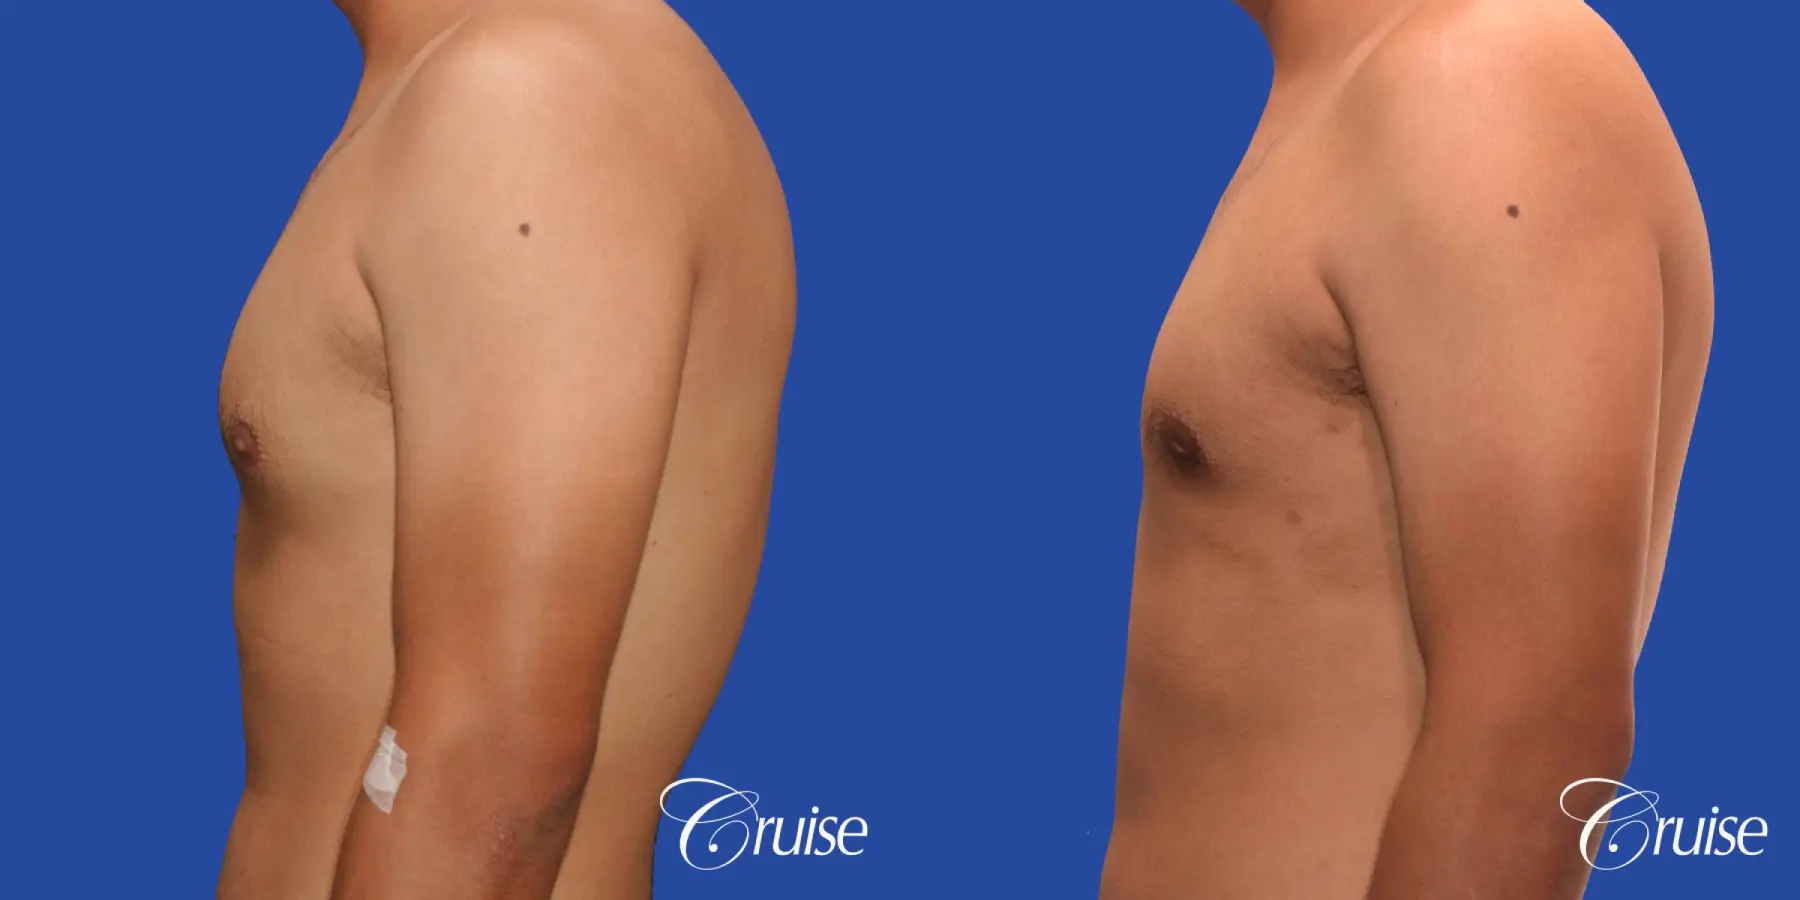 mild gynecomastia standard PA areola incision - Before and After 2